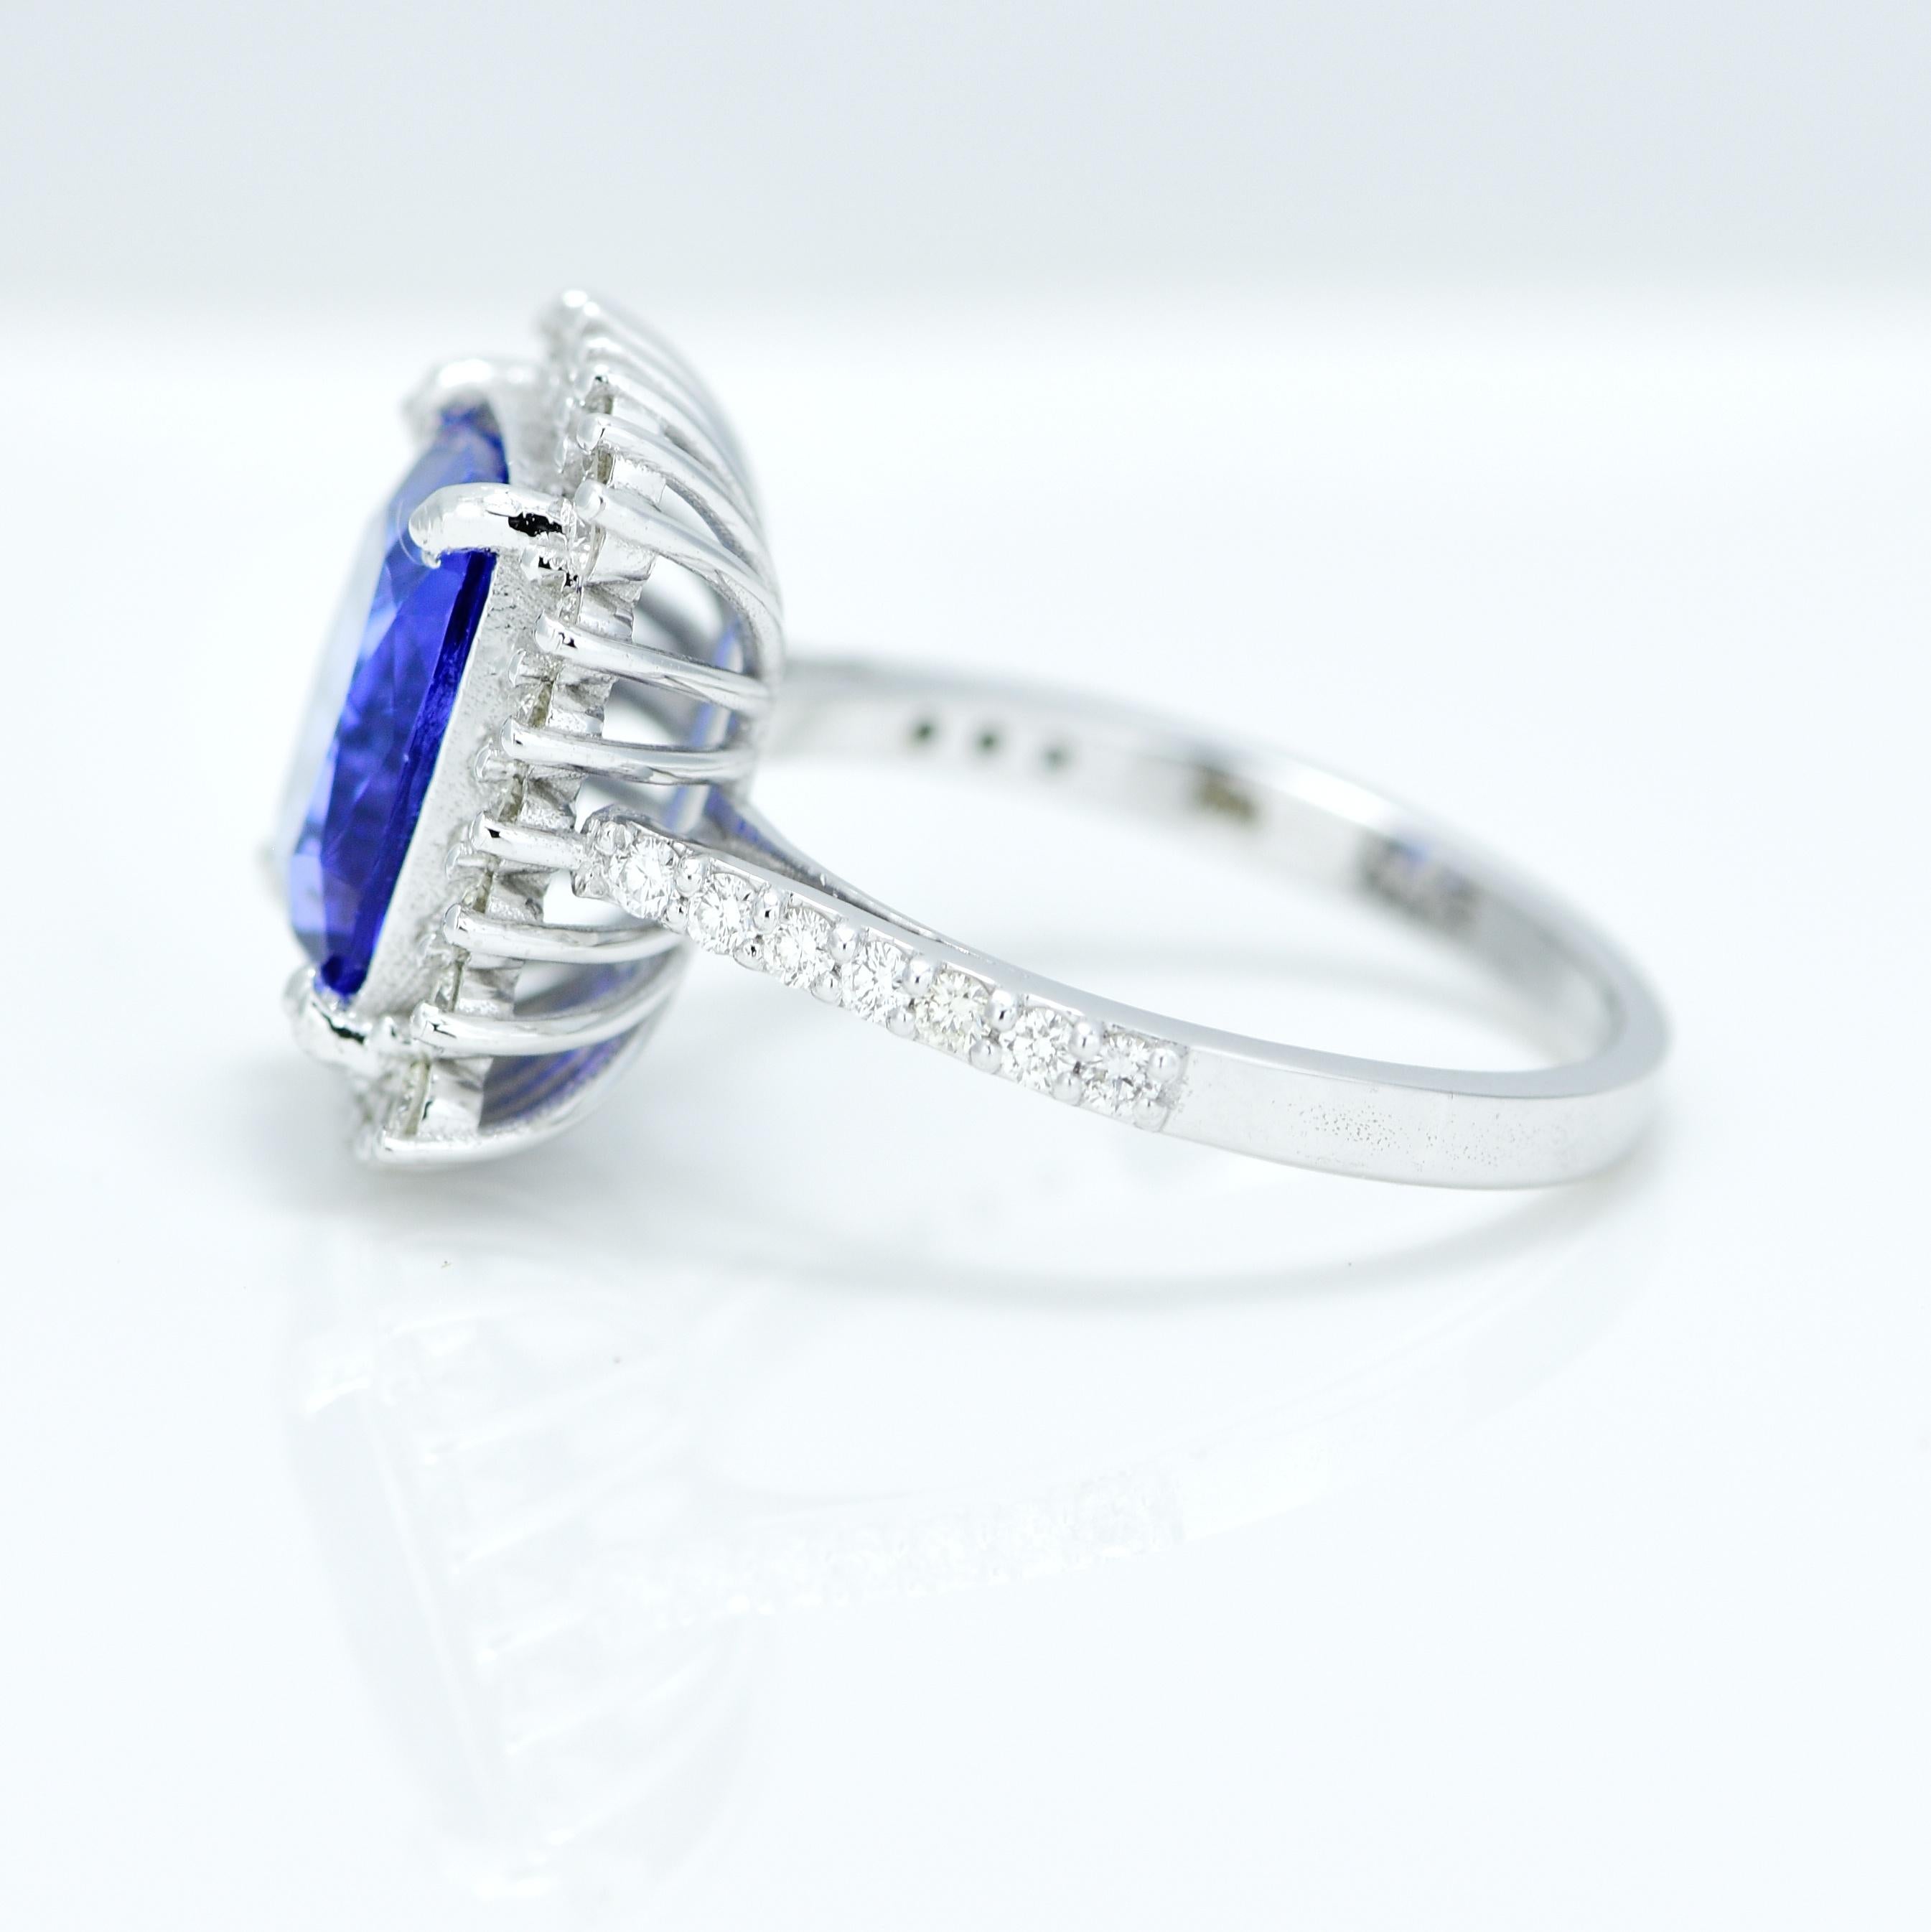 Stunning Violetish Blue Tanzanite and Diamond halo ring.

Centre Stone - Natural Tanzanite, 
Centre Stone Weight - 3.63 Carat, 
Centre Stone Shape & Cut - Long Cushion Step Cut
 
Total Number of Diamonds - 38, 
Diamonds Carat Weight - 0.56